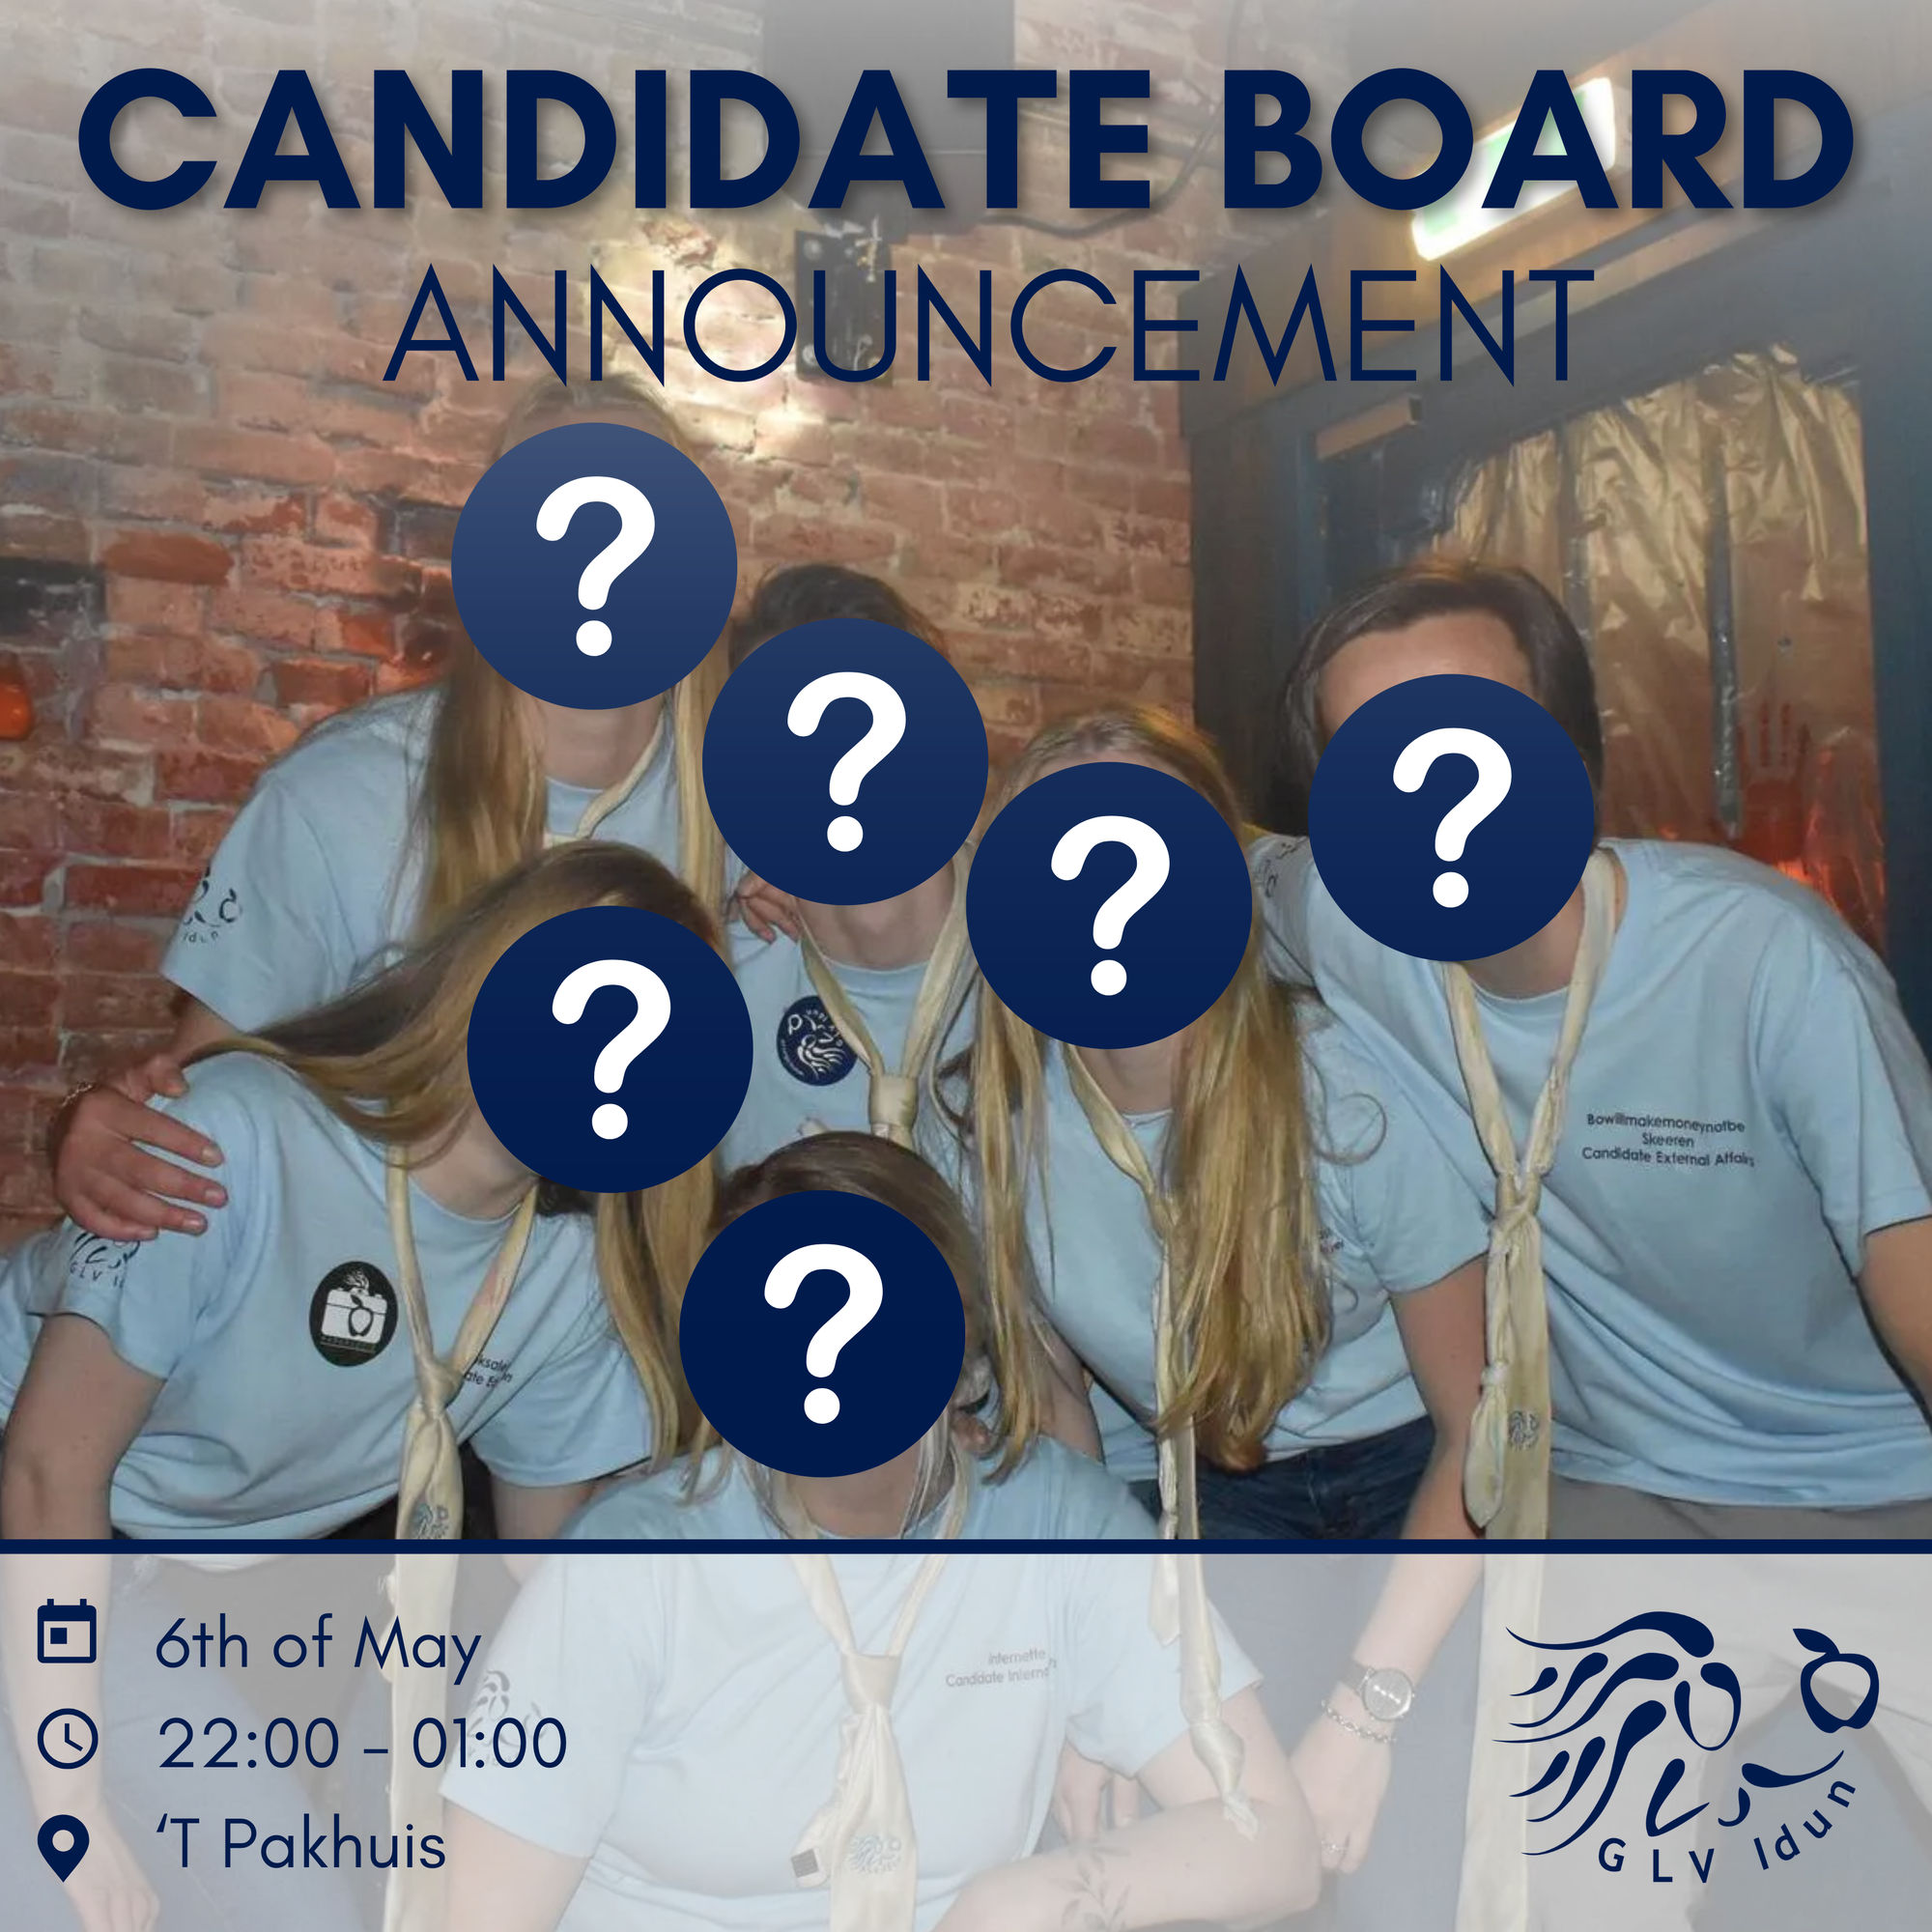 Candidate Board Announcement